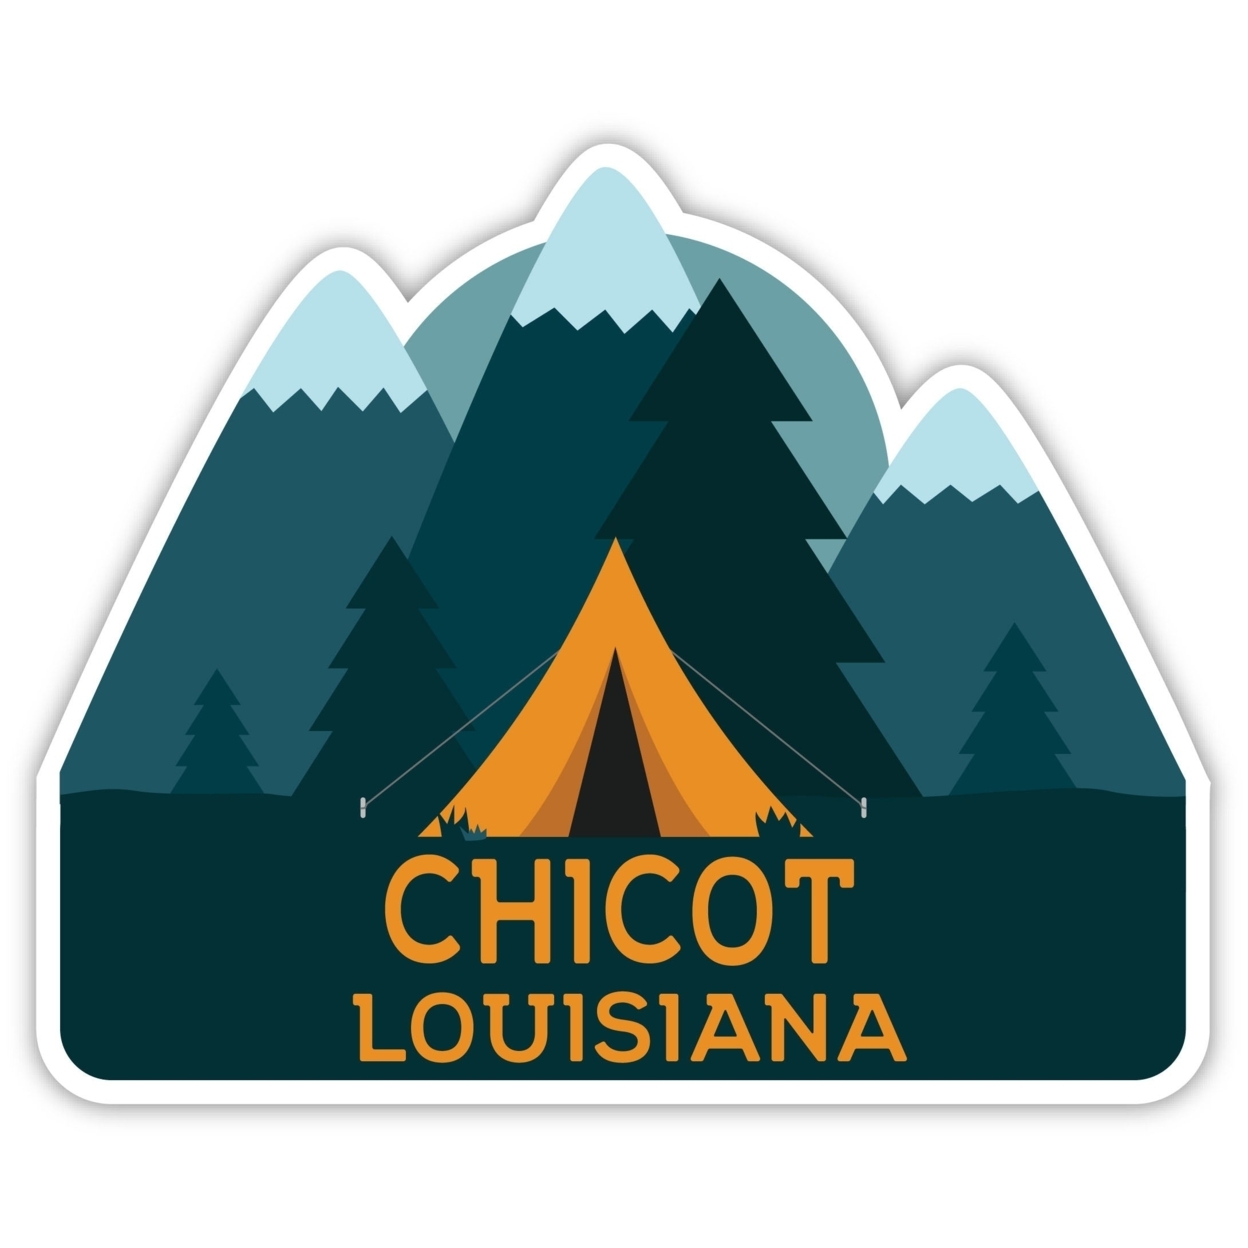 Chicot Louisiana Souvenir Decorative Stickers (Choose Theme And Size) - 4-Pack, 12-Inch, Tent